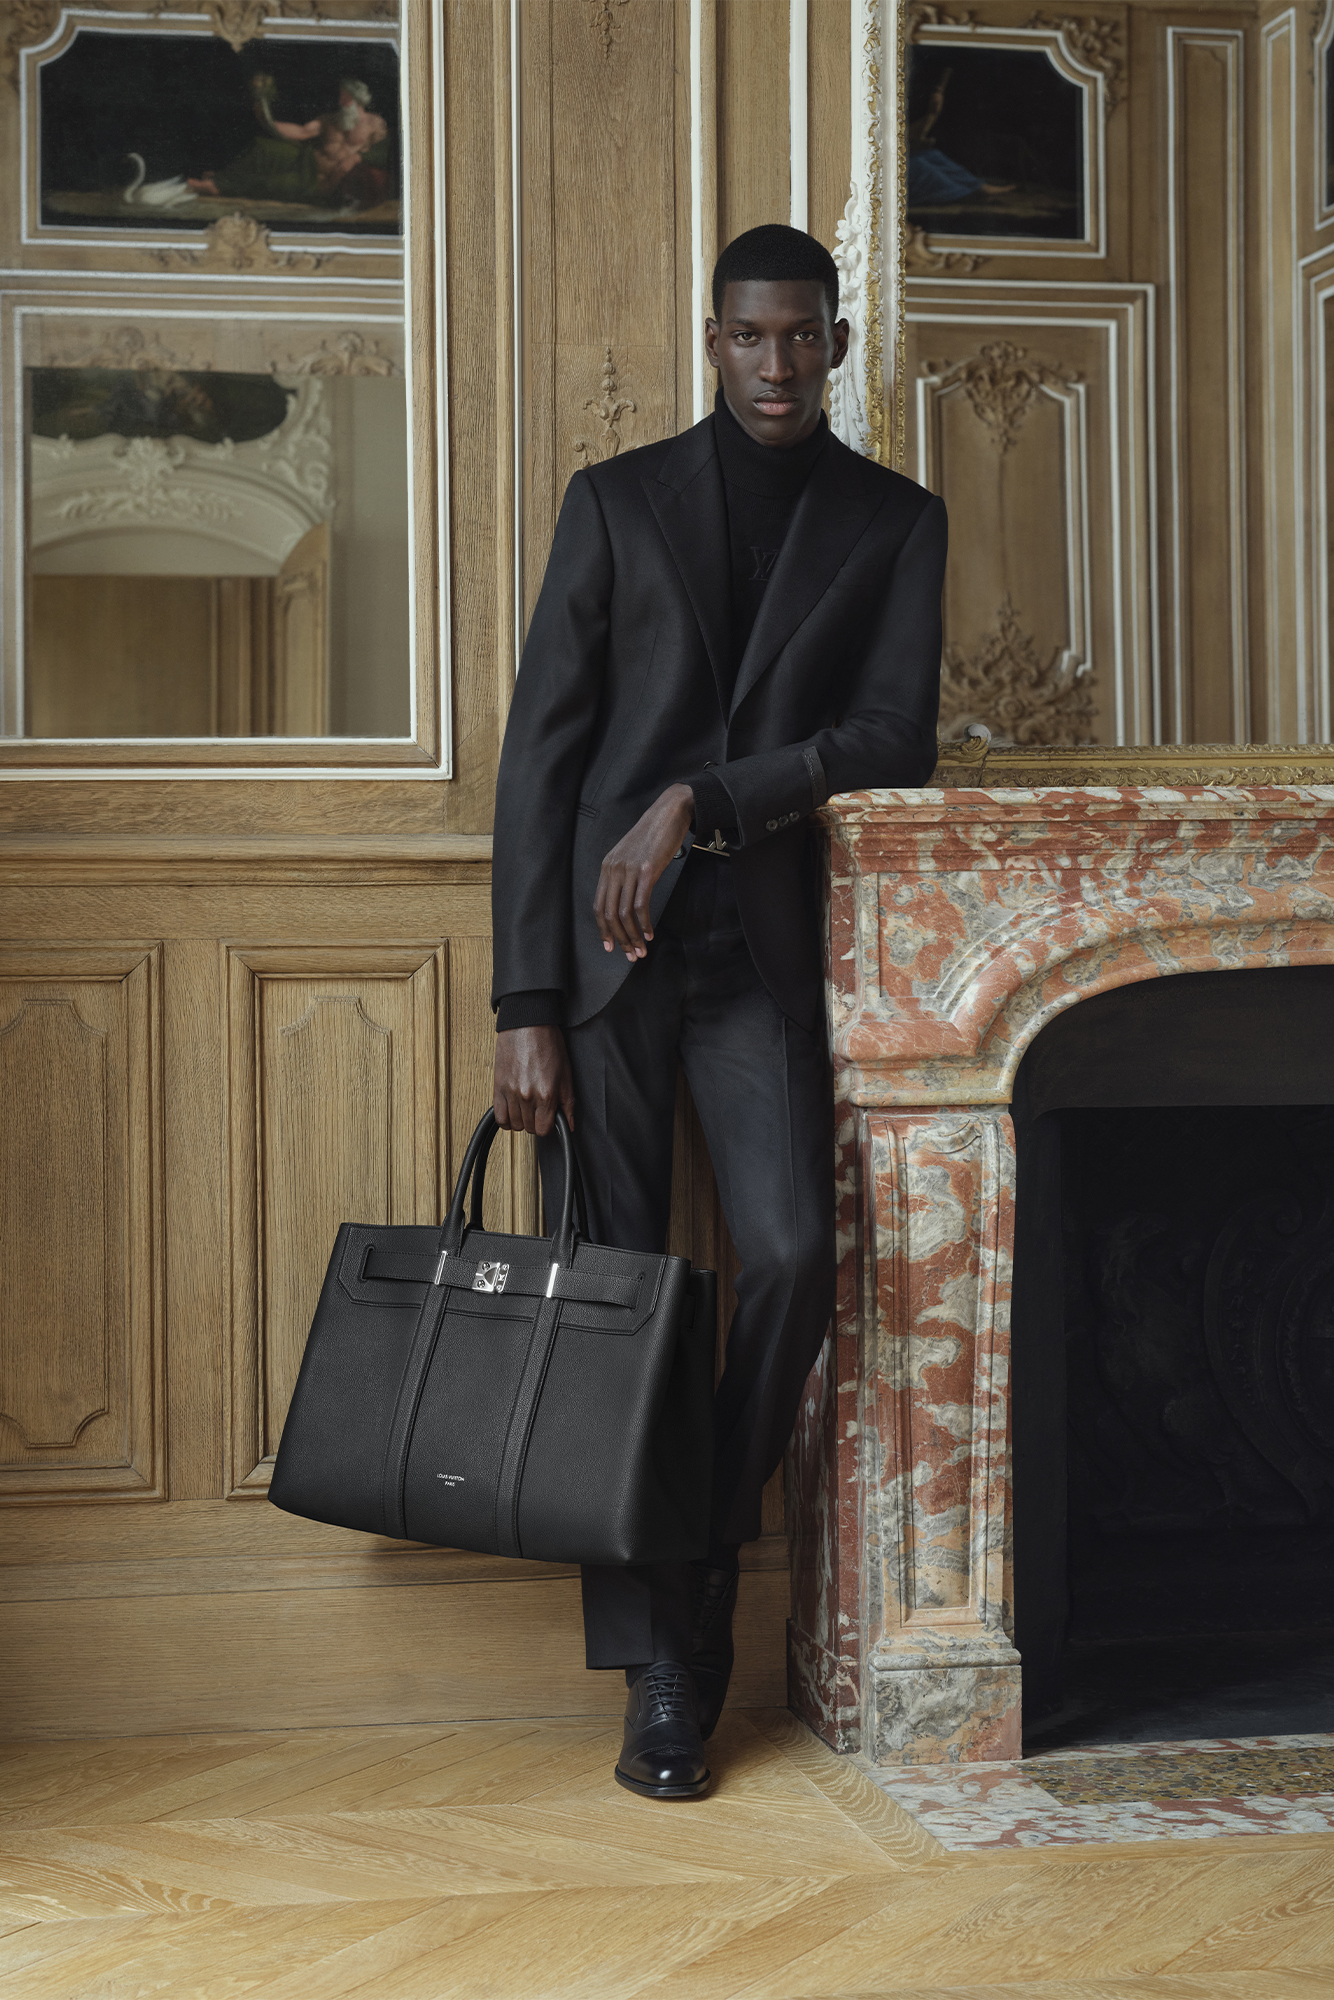 Model wearing a Louis Vuitton black outfit holds a bag and looks at camera while leaning by fireplace